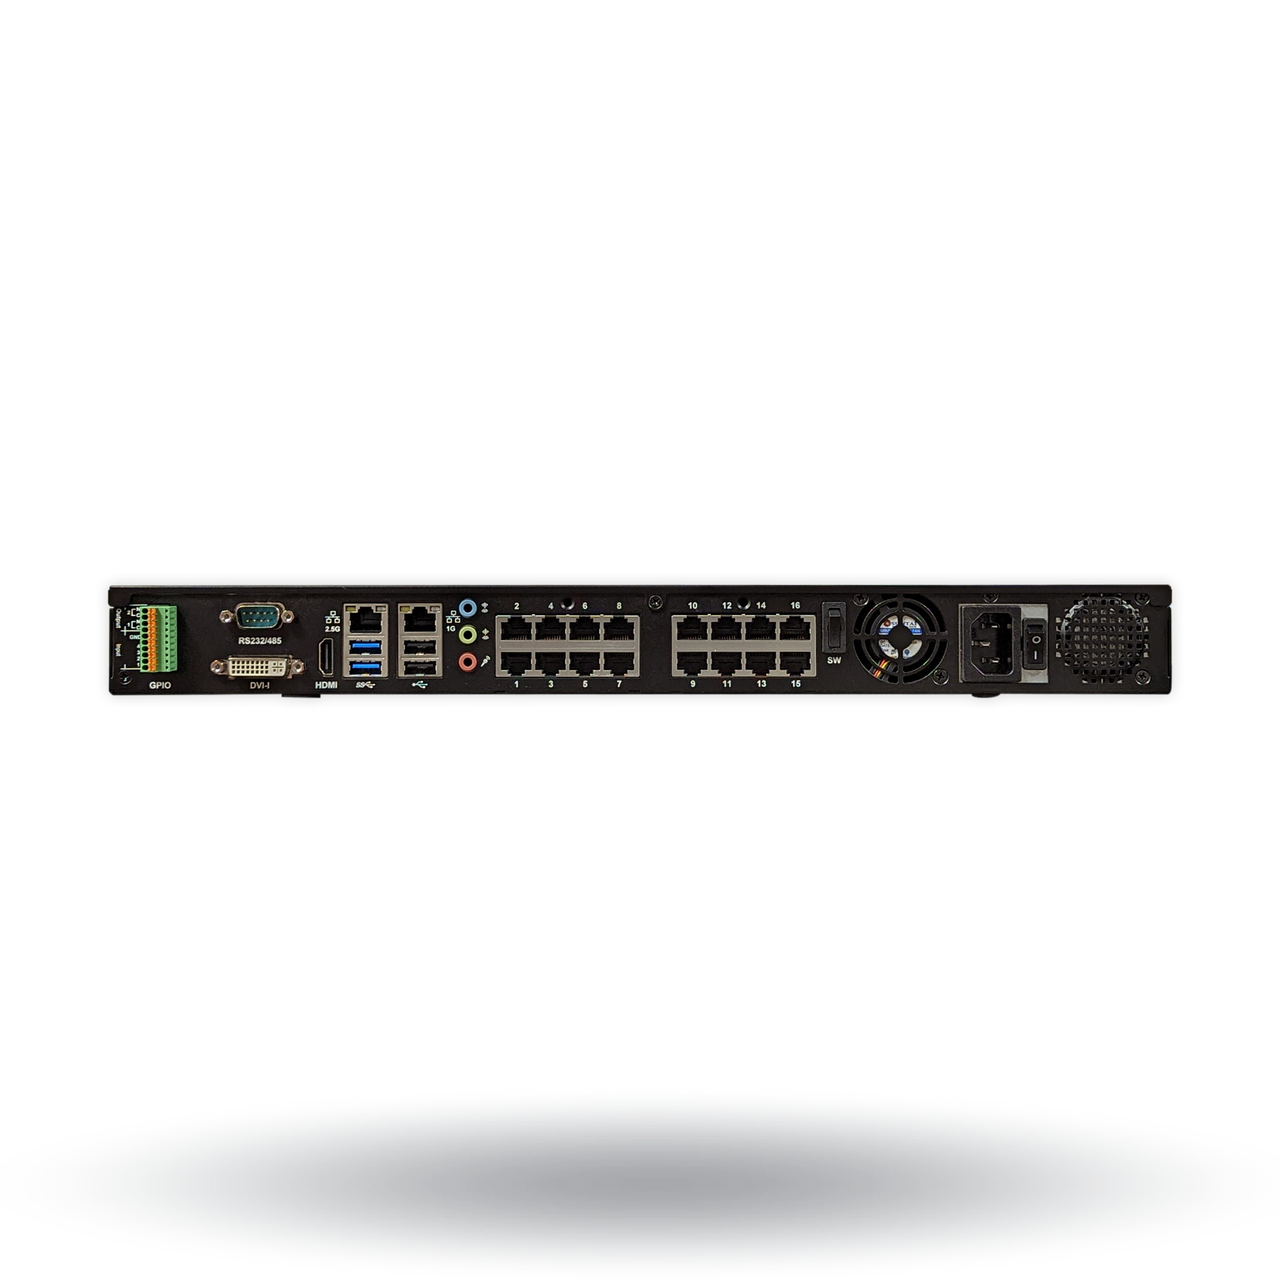 Digital Watchdog DW-BJCX40T-LX 24-Channel 80Mbps NVR with 16 PoE Ports, 40TB HDD